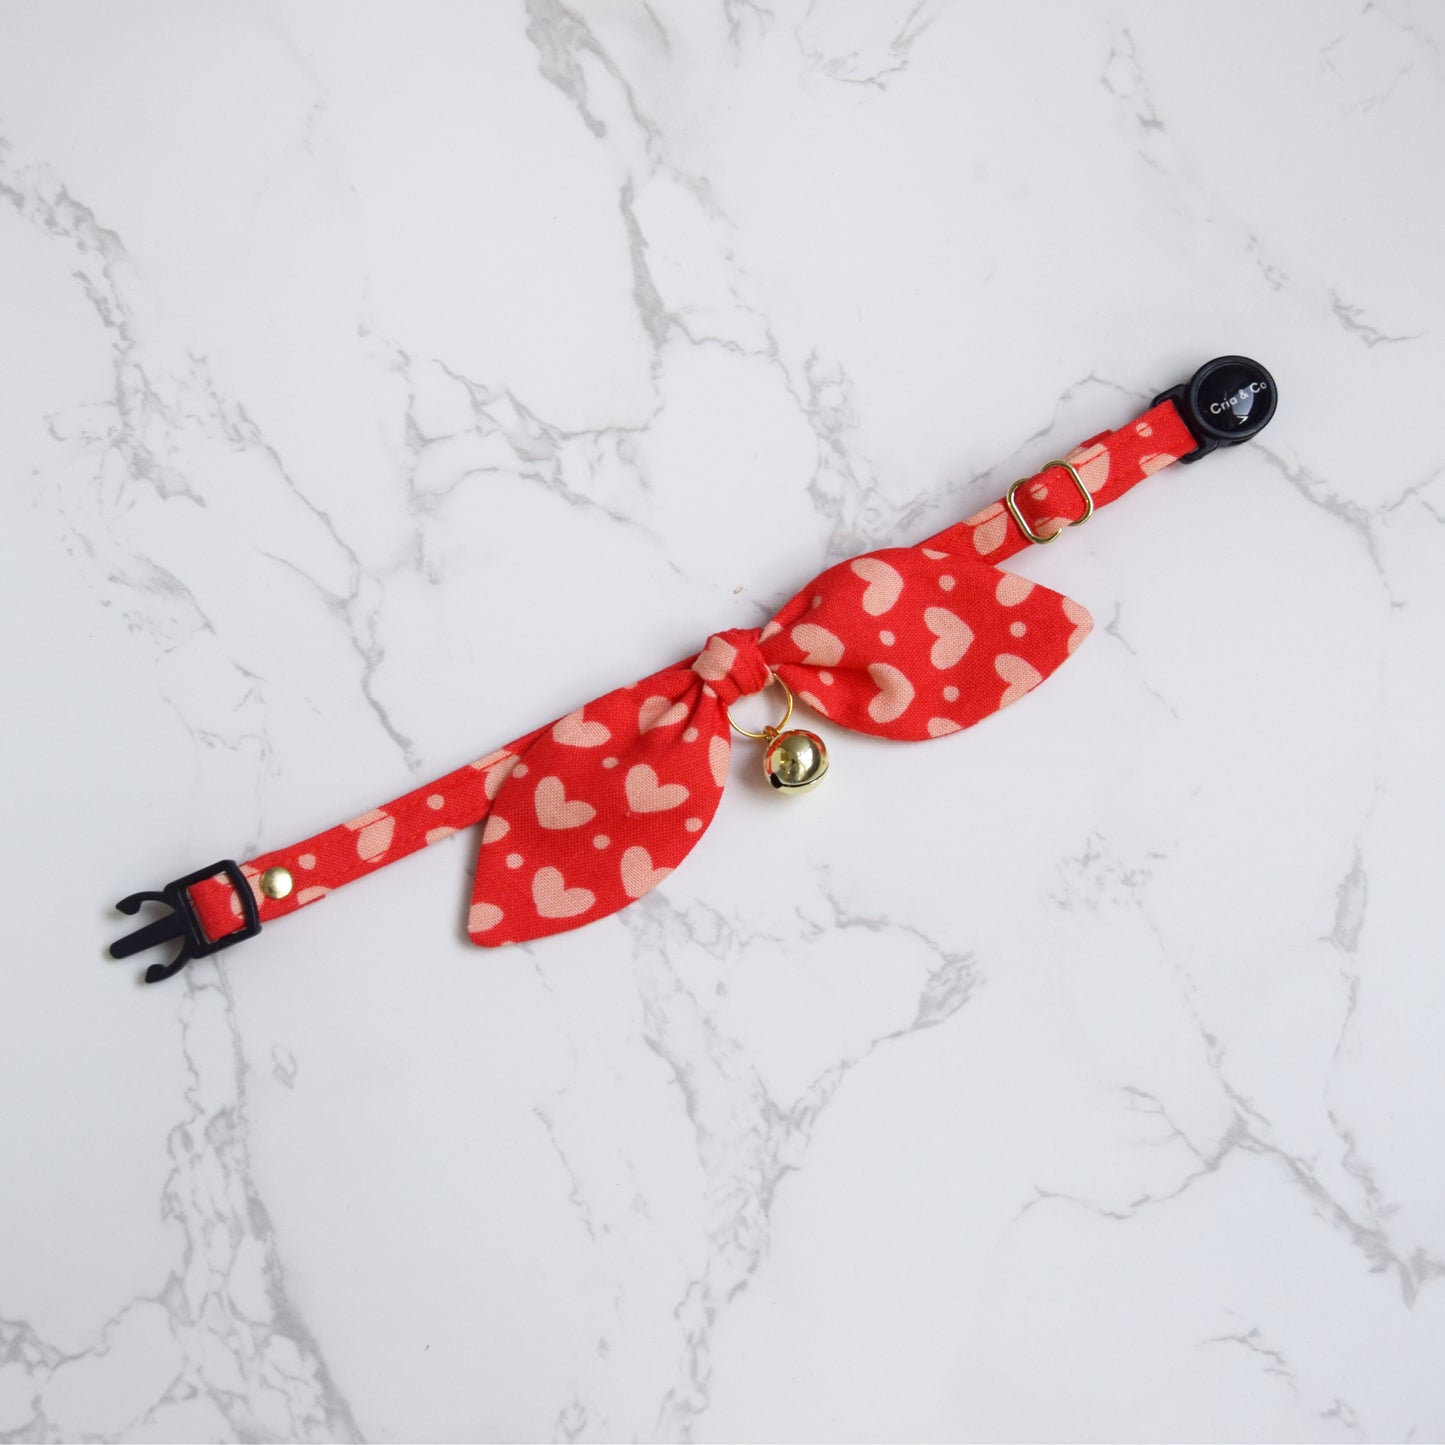 Red Heart Print Bow Cat Collar